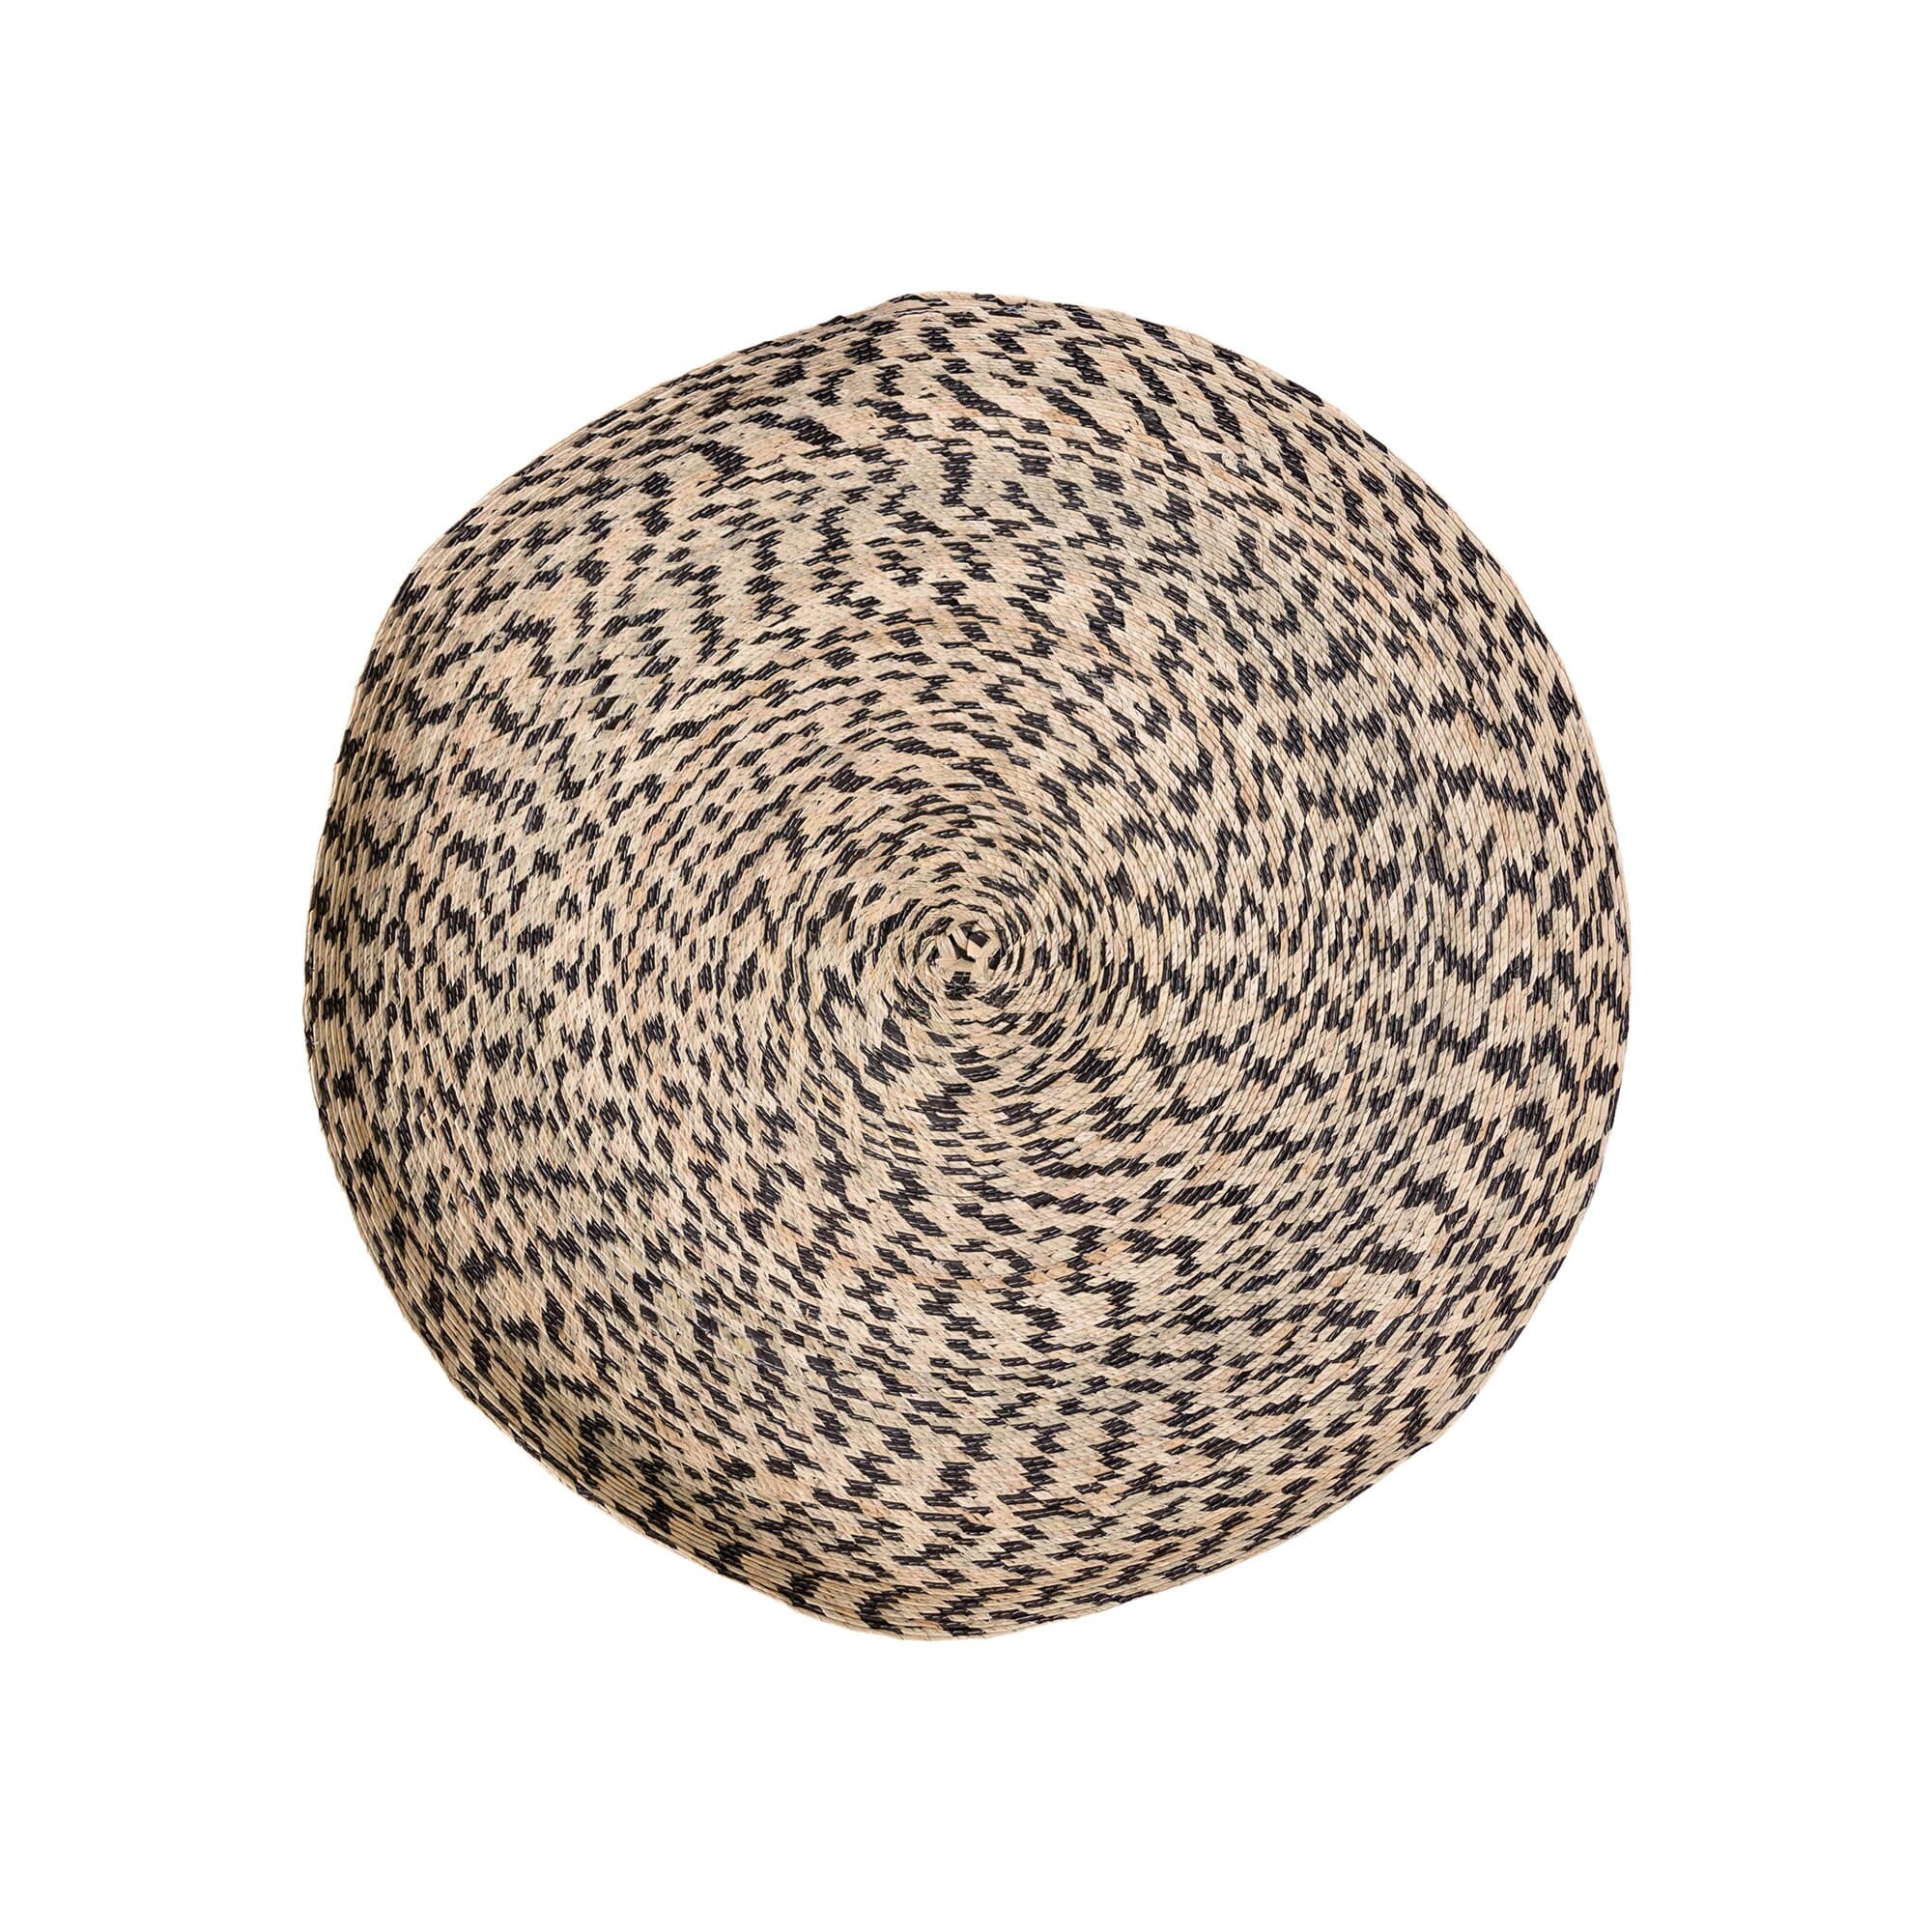 Round Handwoven Palm Tray | L Kitchen & Dining 